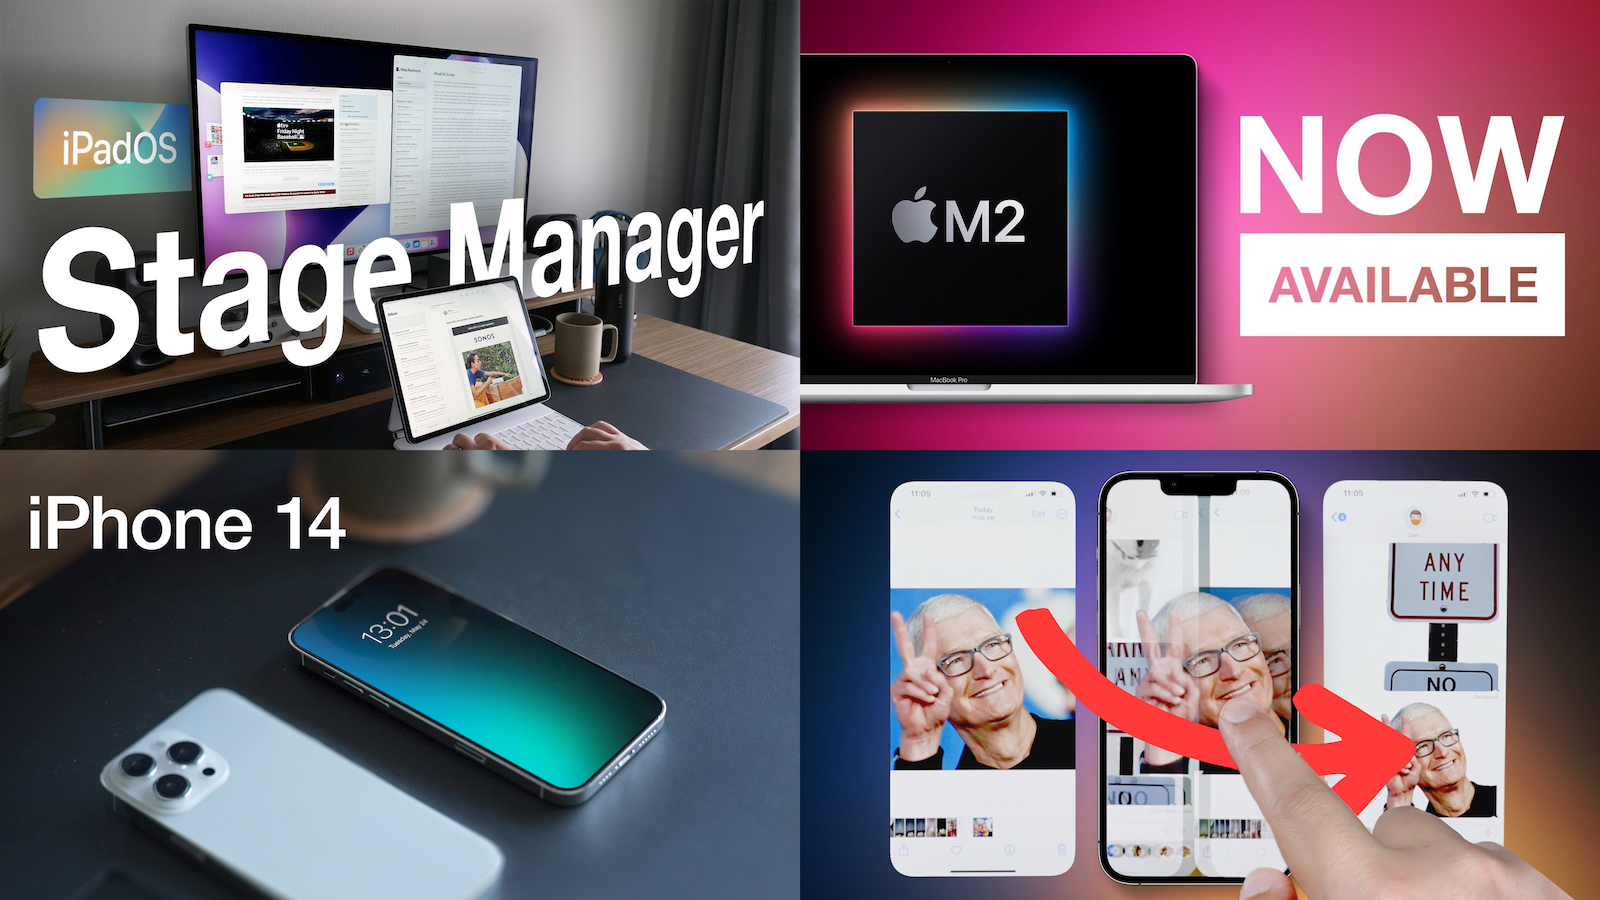 Top Stories: iPadOS 16 Stage Manager, M2 MacBook Pro Launch, and More